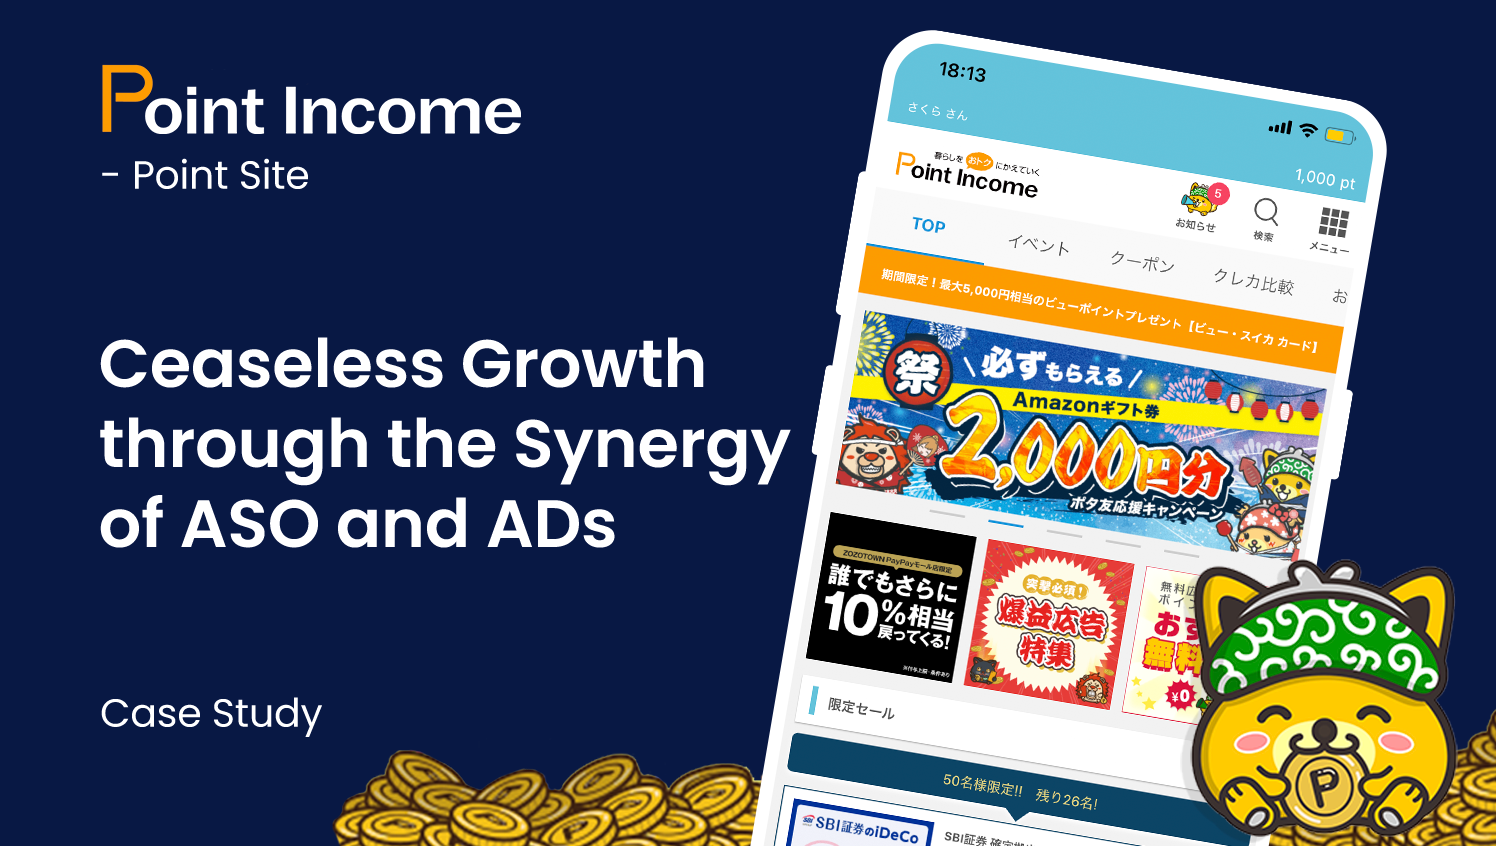 Ceaseless Growth through the Synergy of ASO and ADs